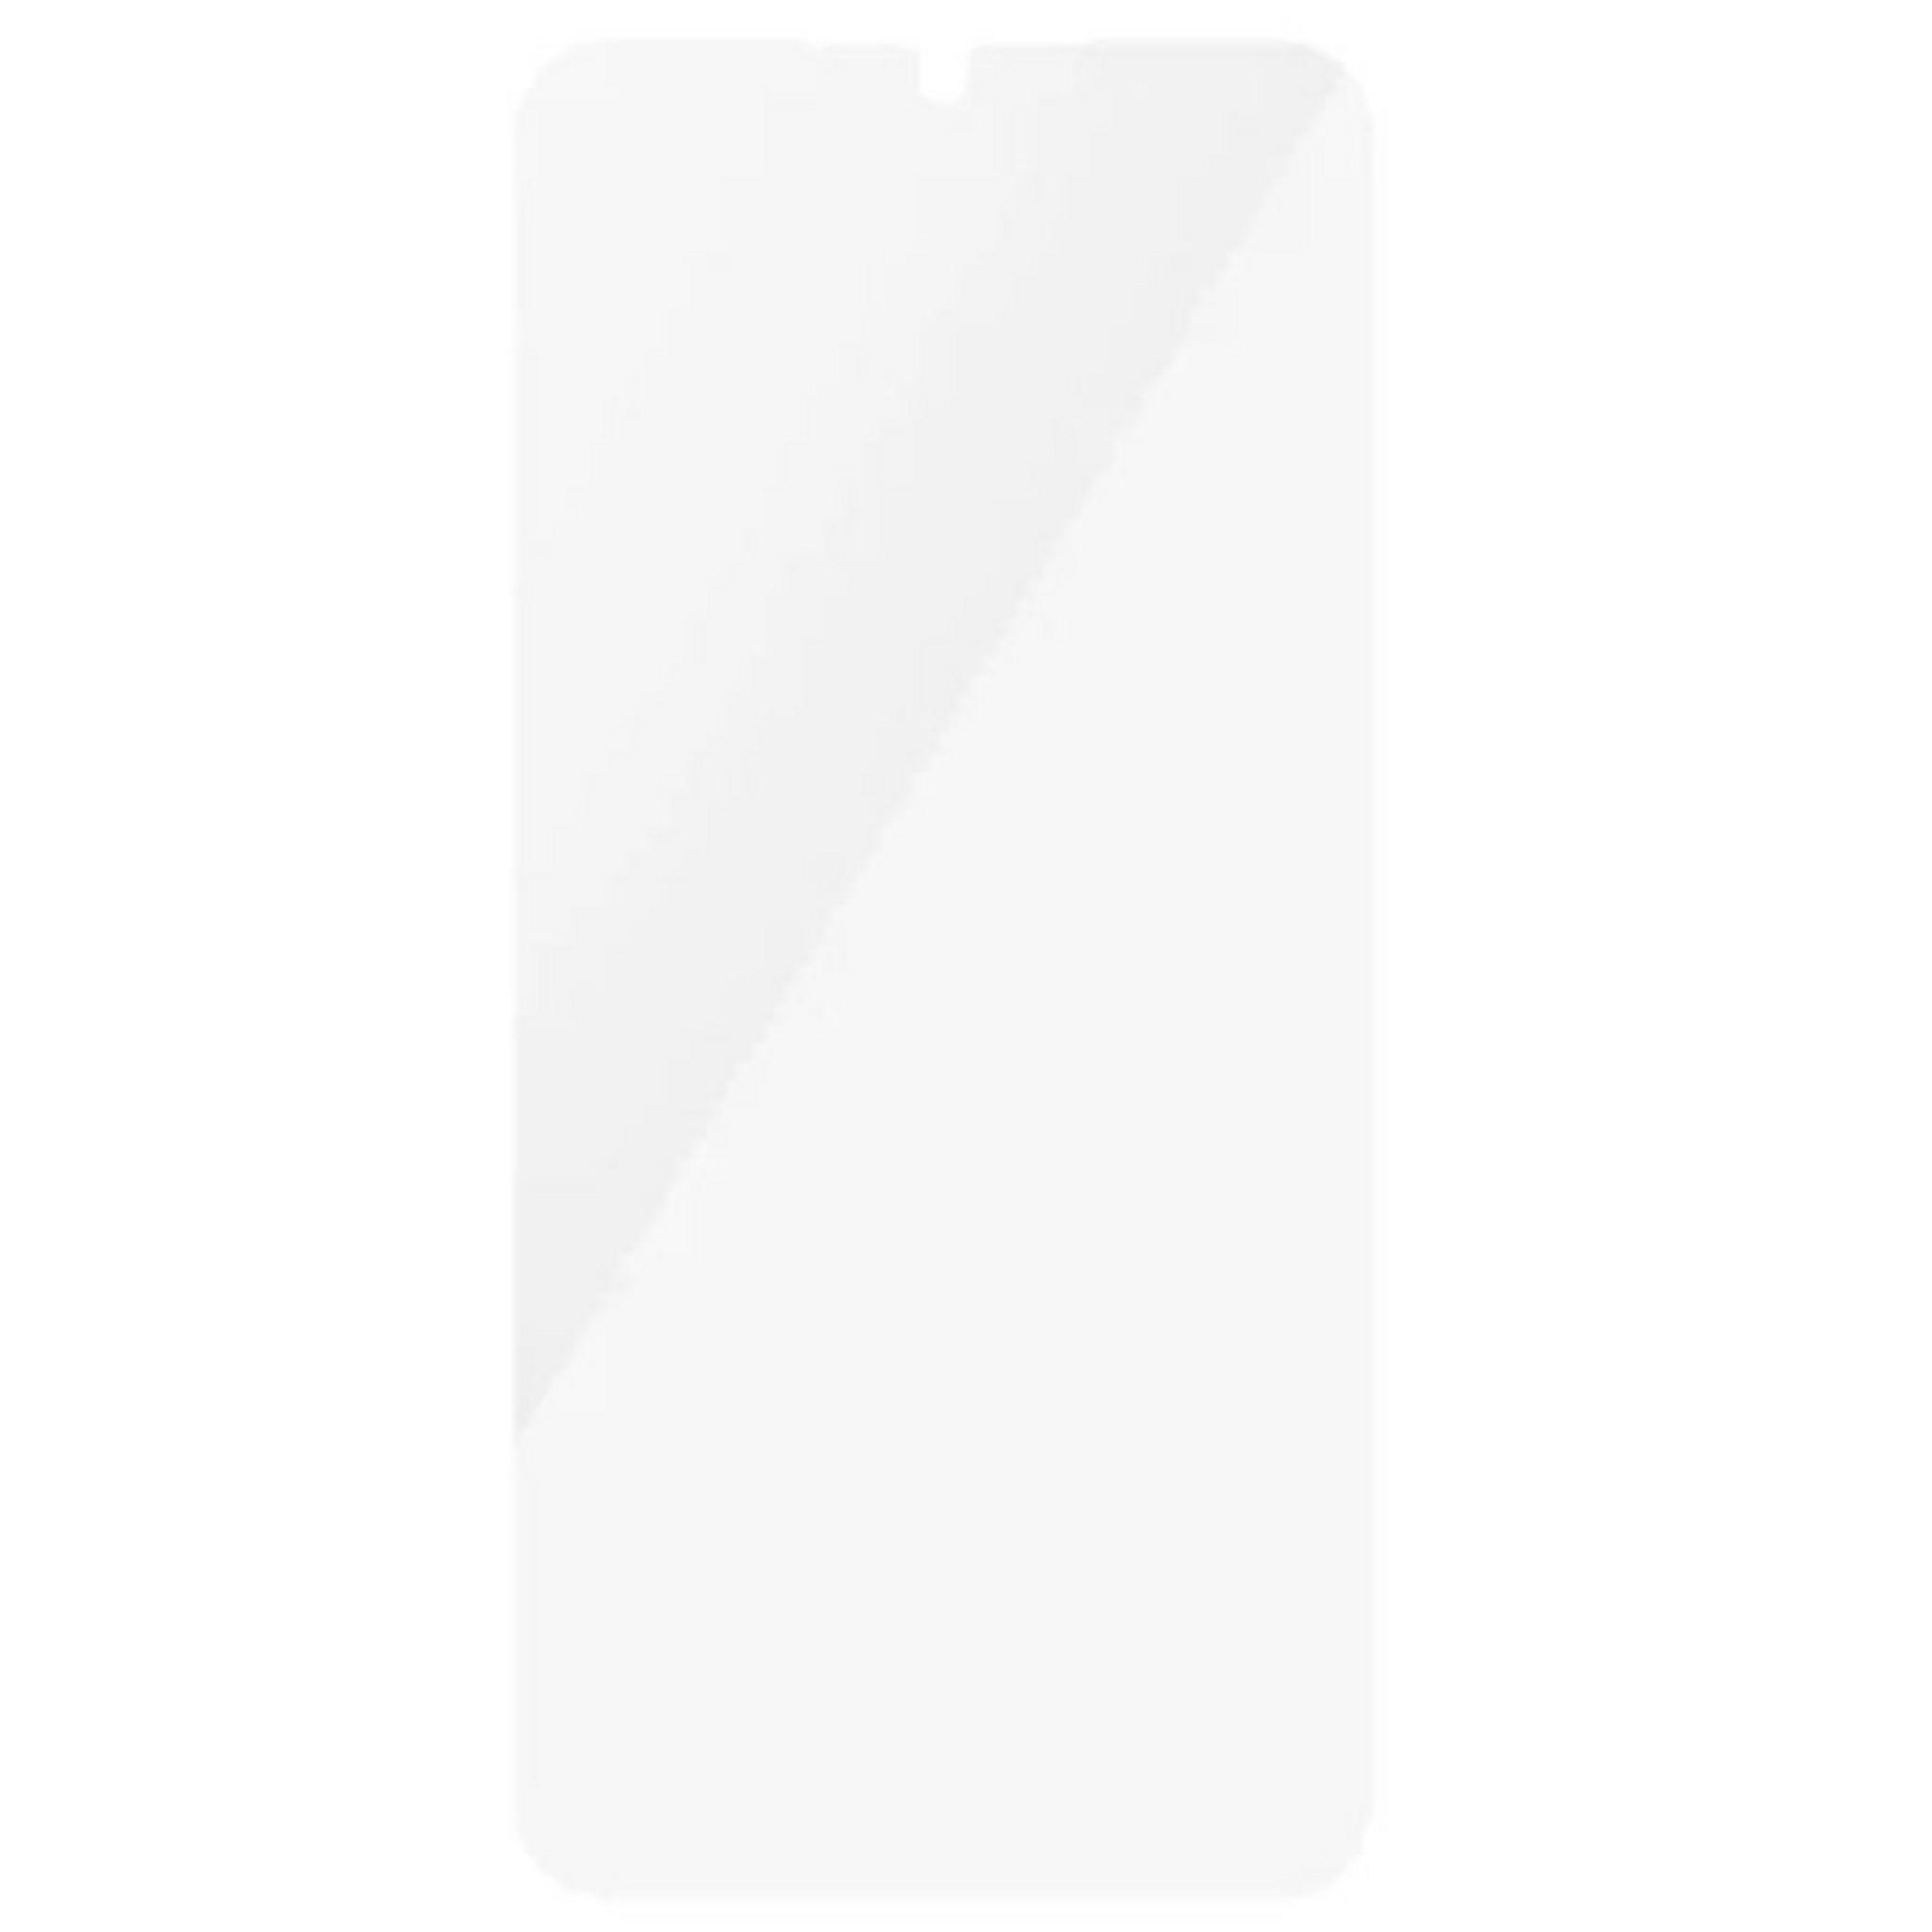 Panzer Safe Screen Protector for Samsung Galaxy A15, SAFE95678 – Clear